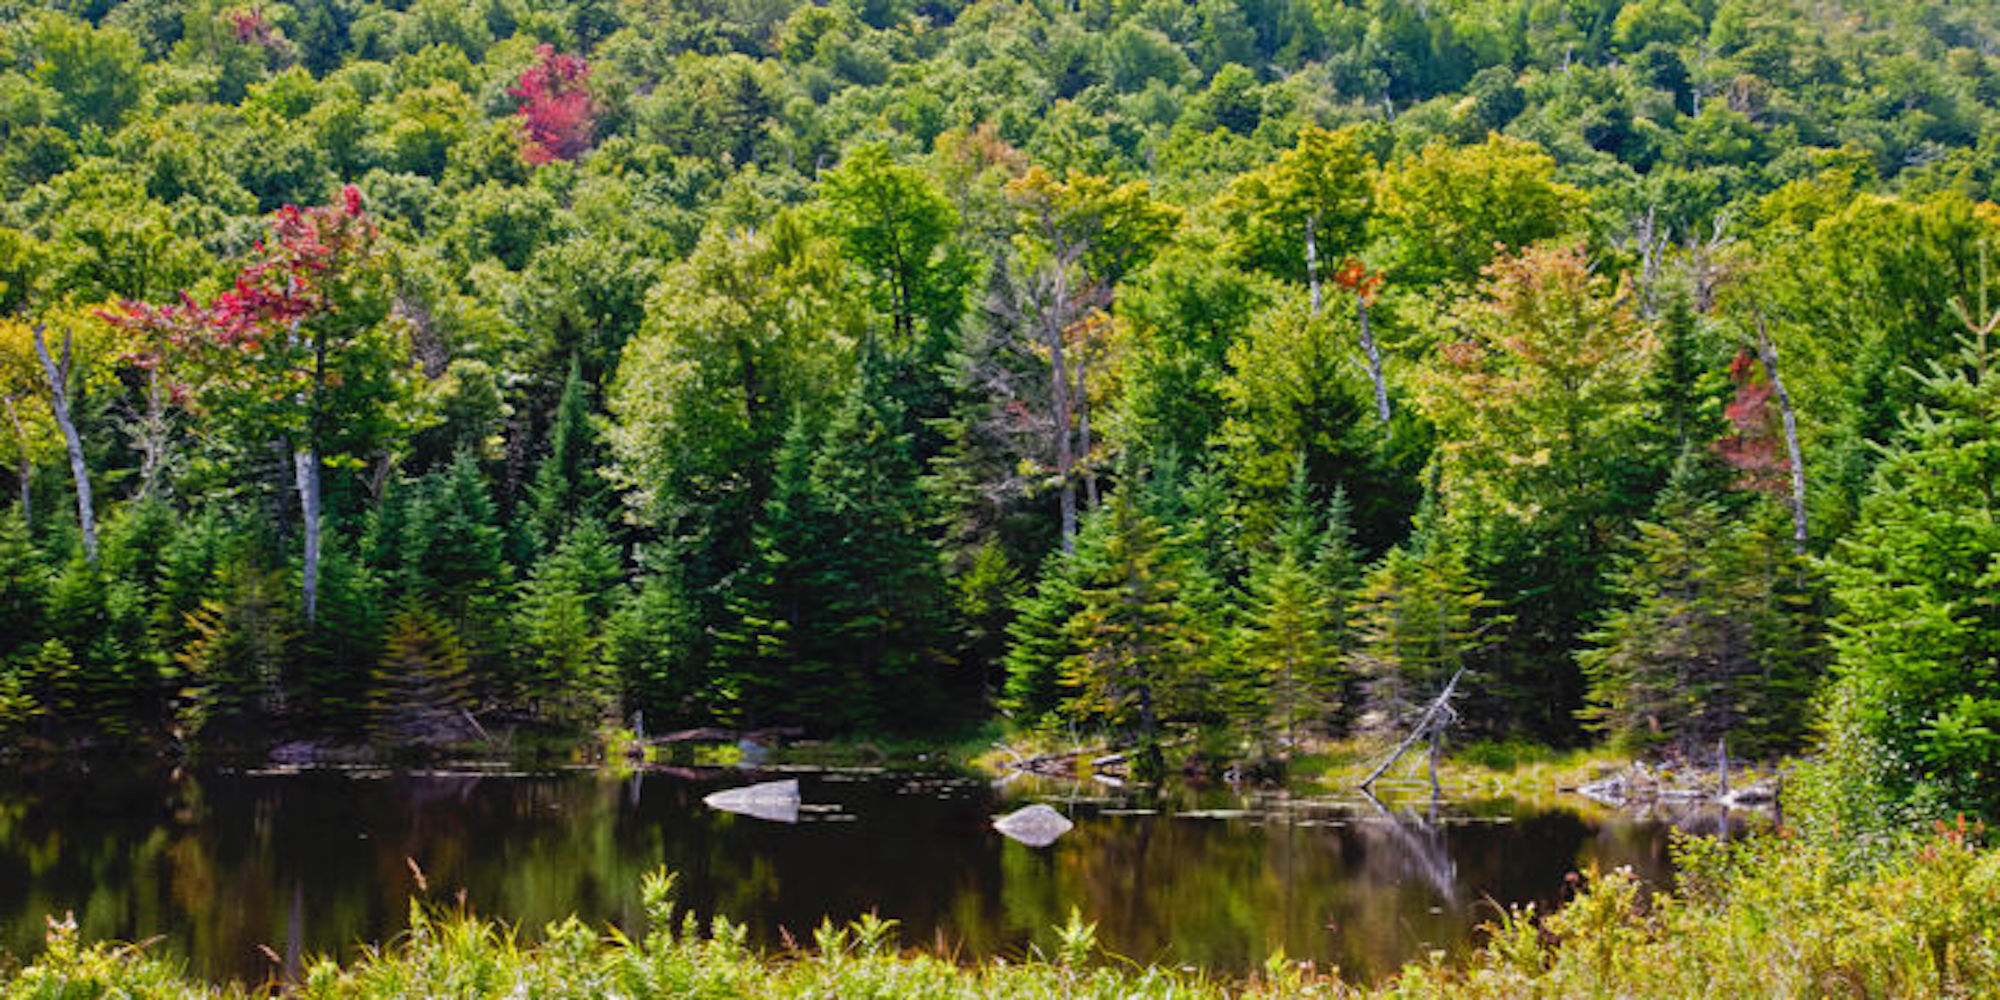 A lake sits in the foreground of the photo with a large forrest behind, all trees are mixed colours of green and red.